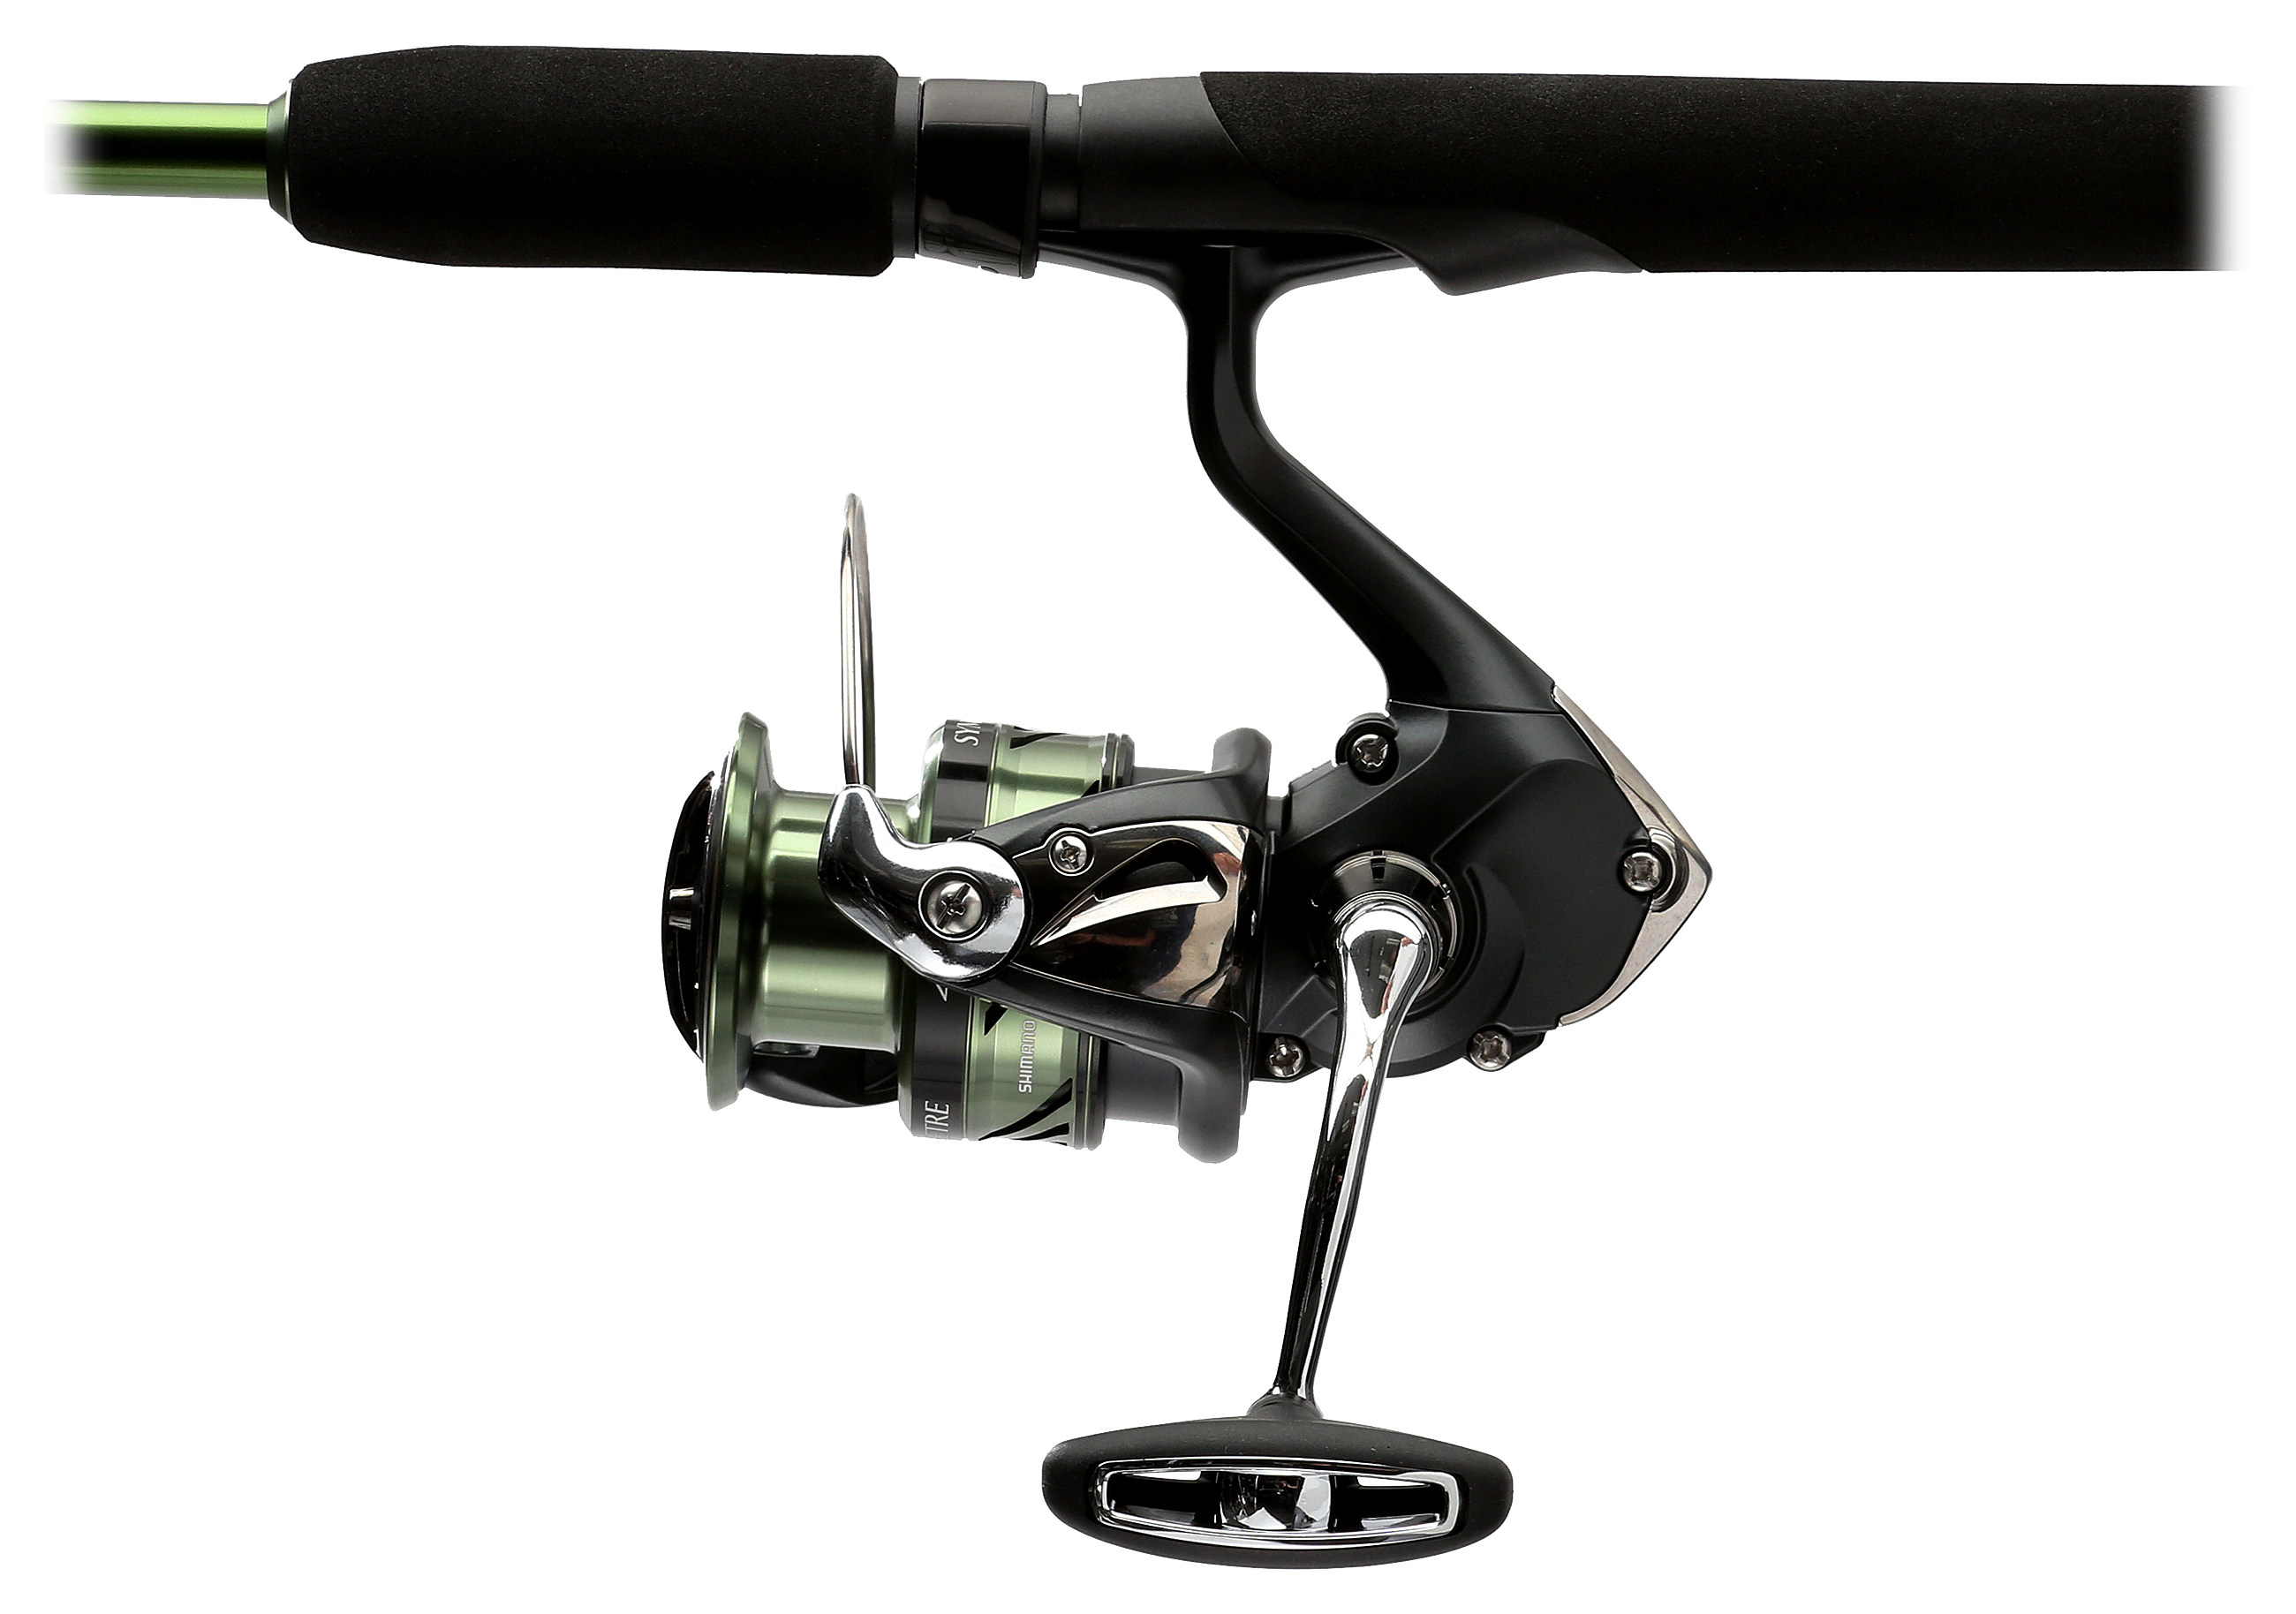 Shop Black Firday Estuary Combo Shimano Symetre Spinning Fishing Combo at  Best Price in